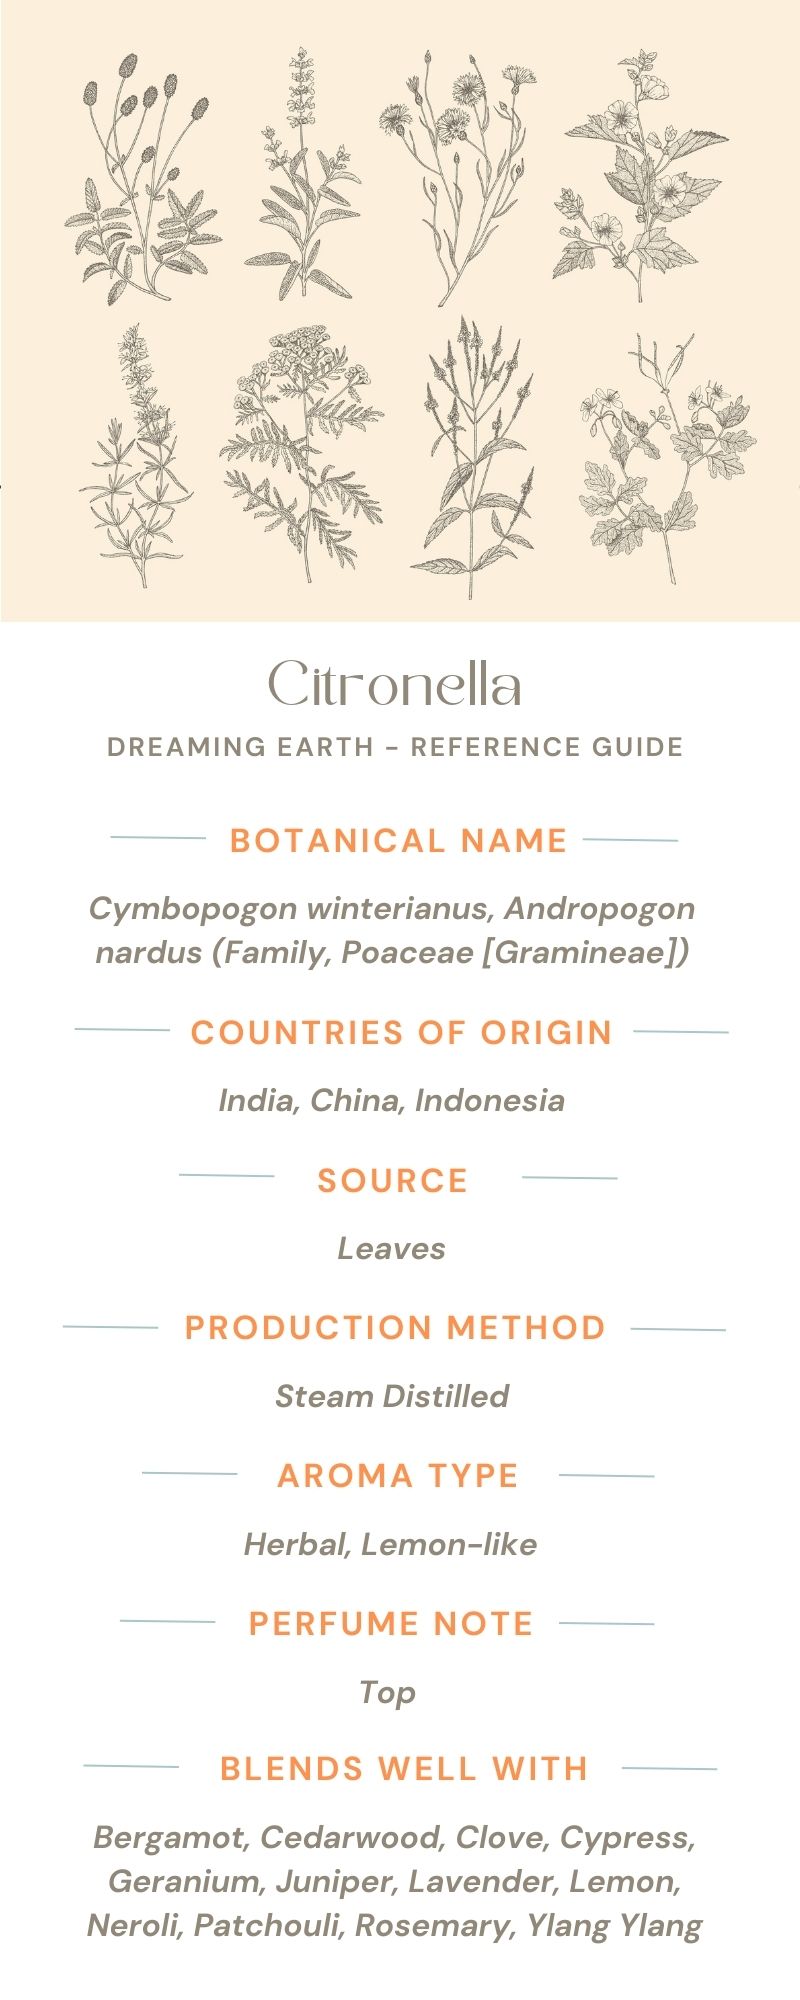 Load image into Gallery viewer, Citronella Organic Essential Oil - Dreaming Earth Inc
